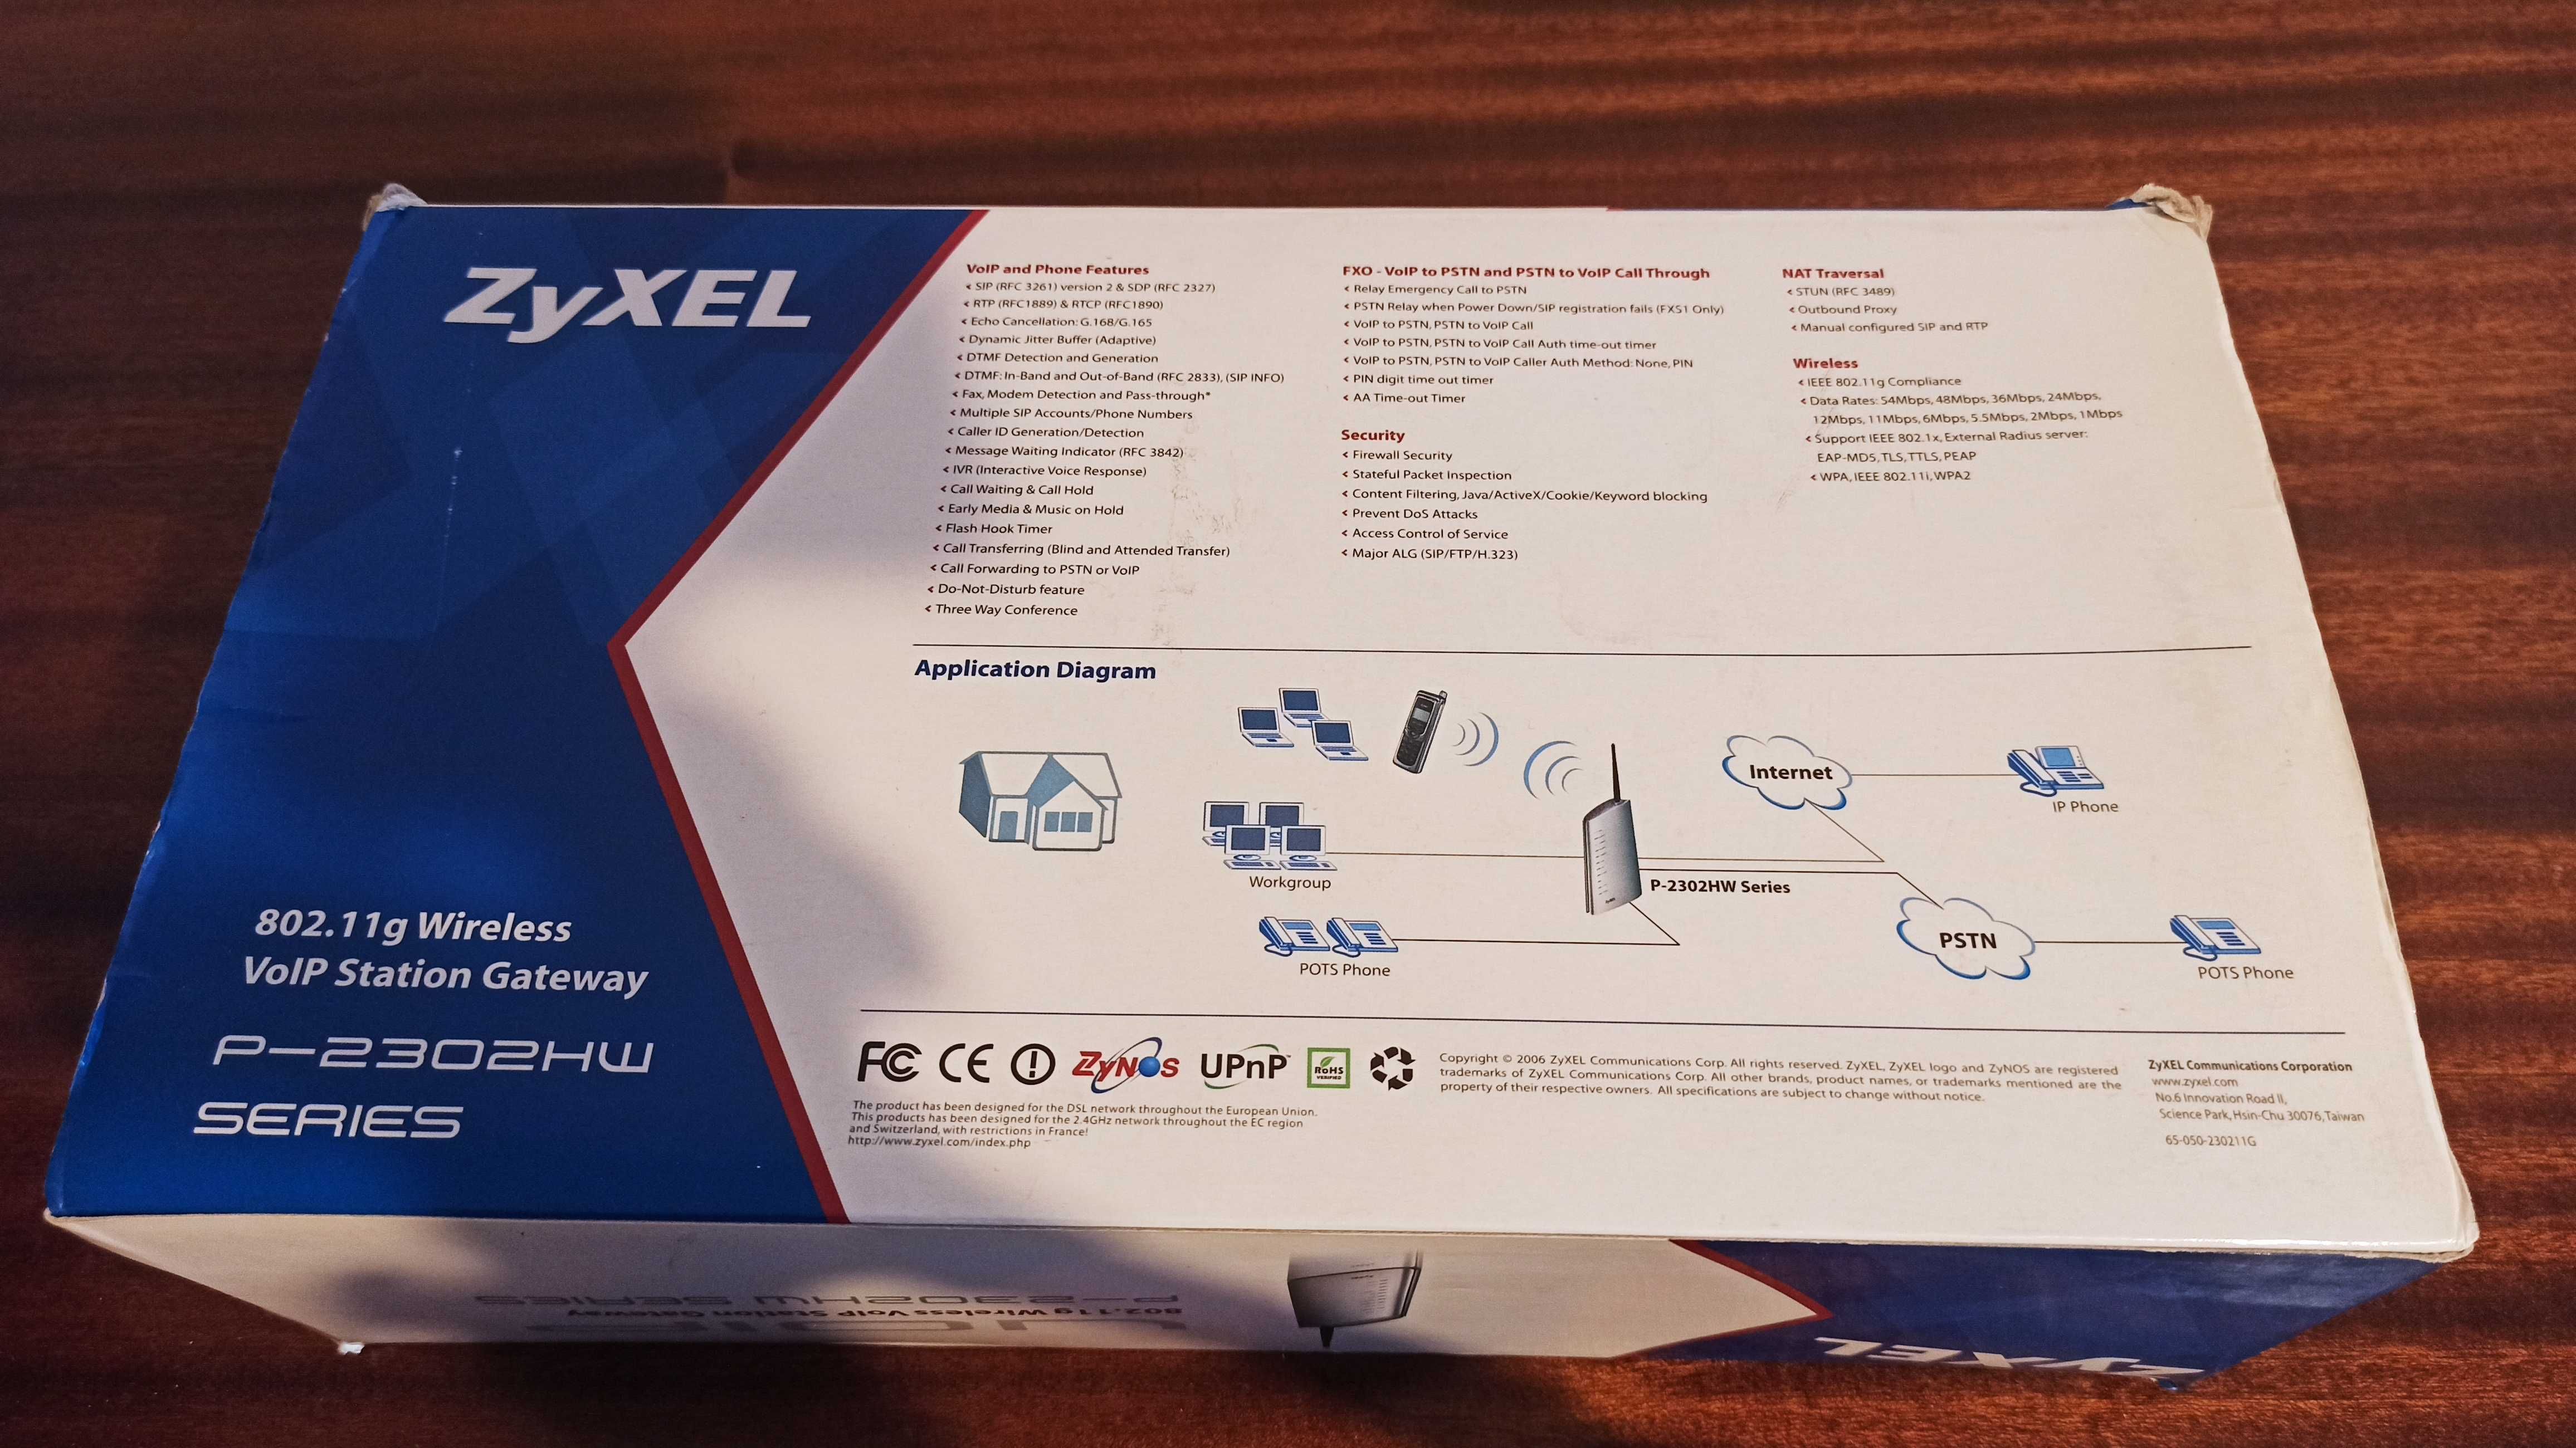 Router Zyxel P-2302HWL-P1